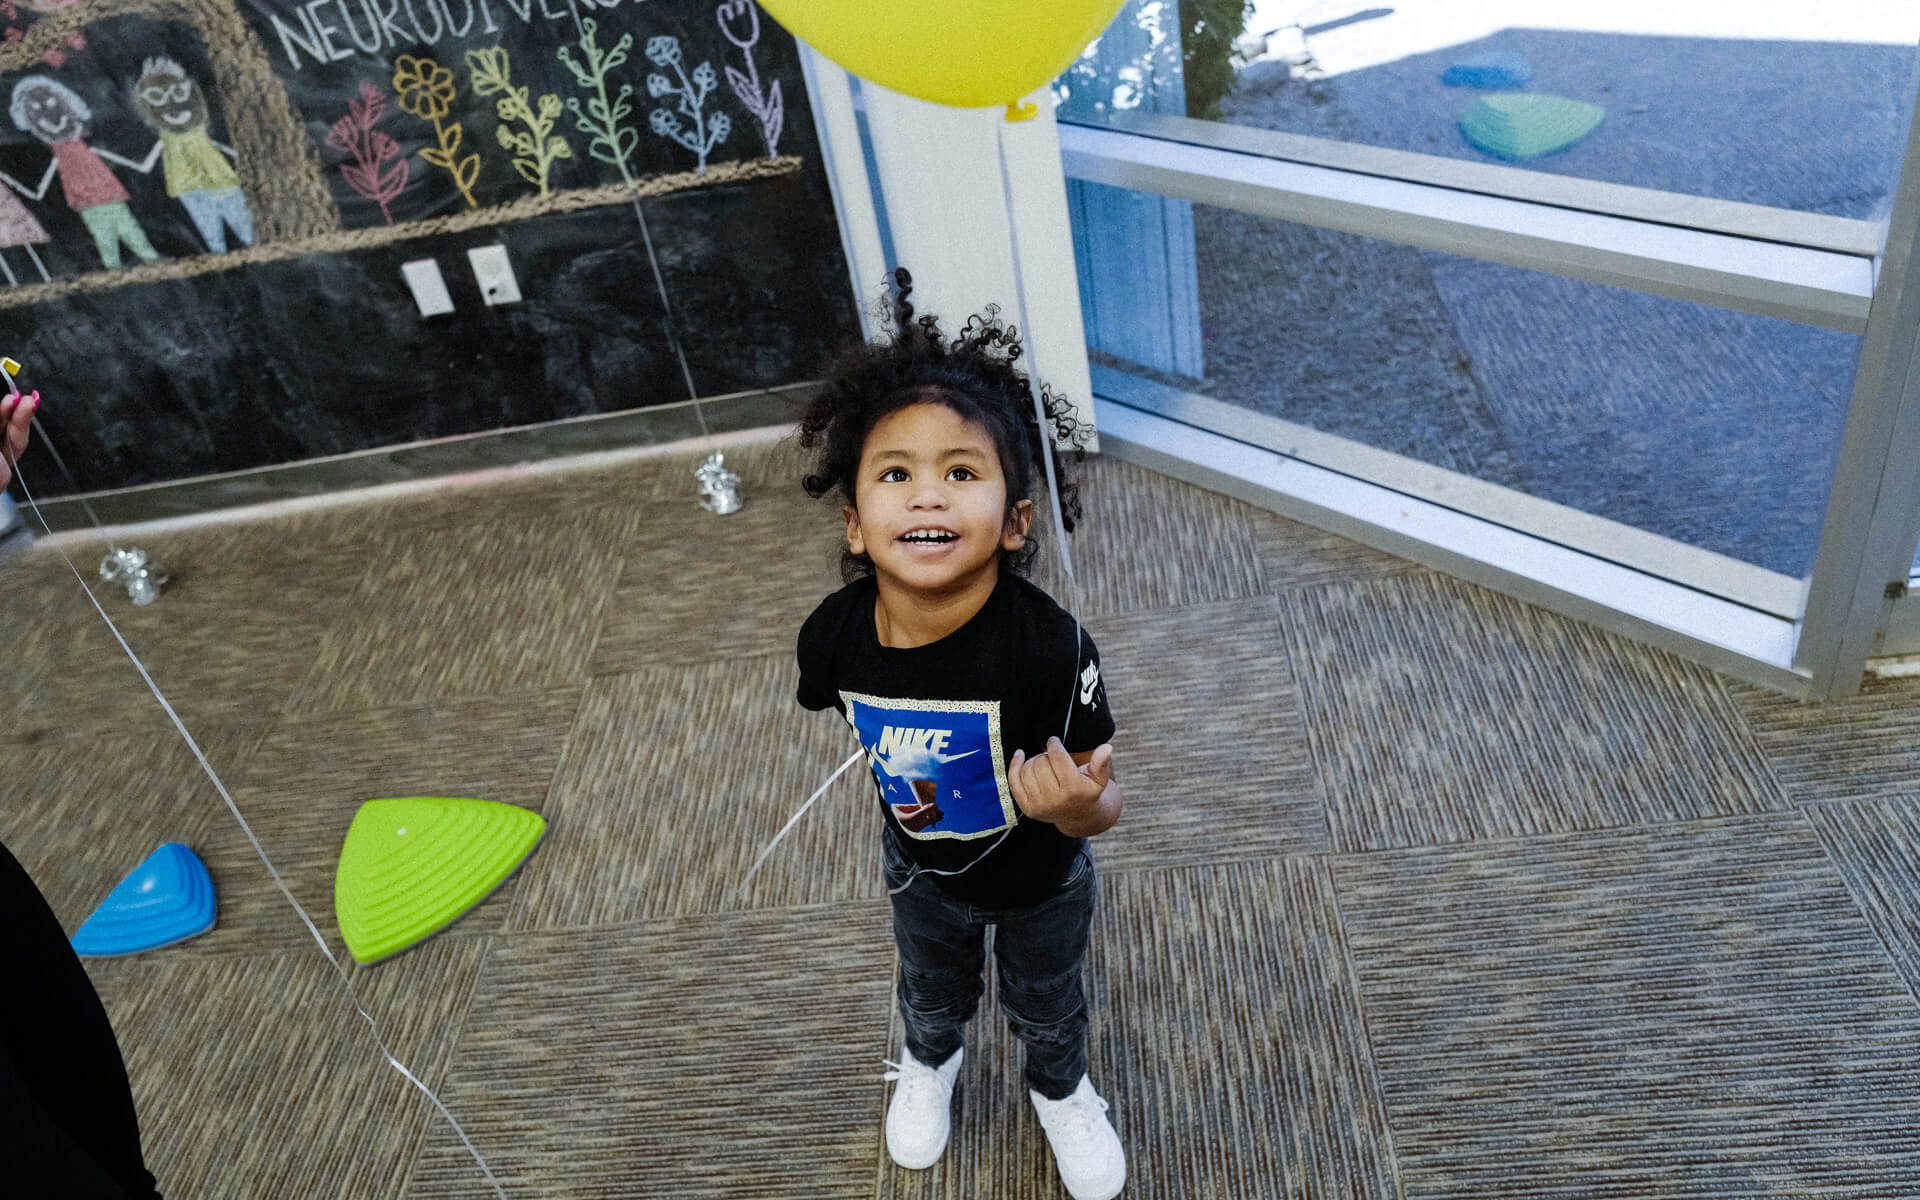 Enjoying a balloon, a kiddo experiences interactive play at InBloom's Learning Centers.